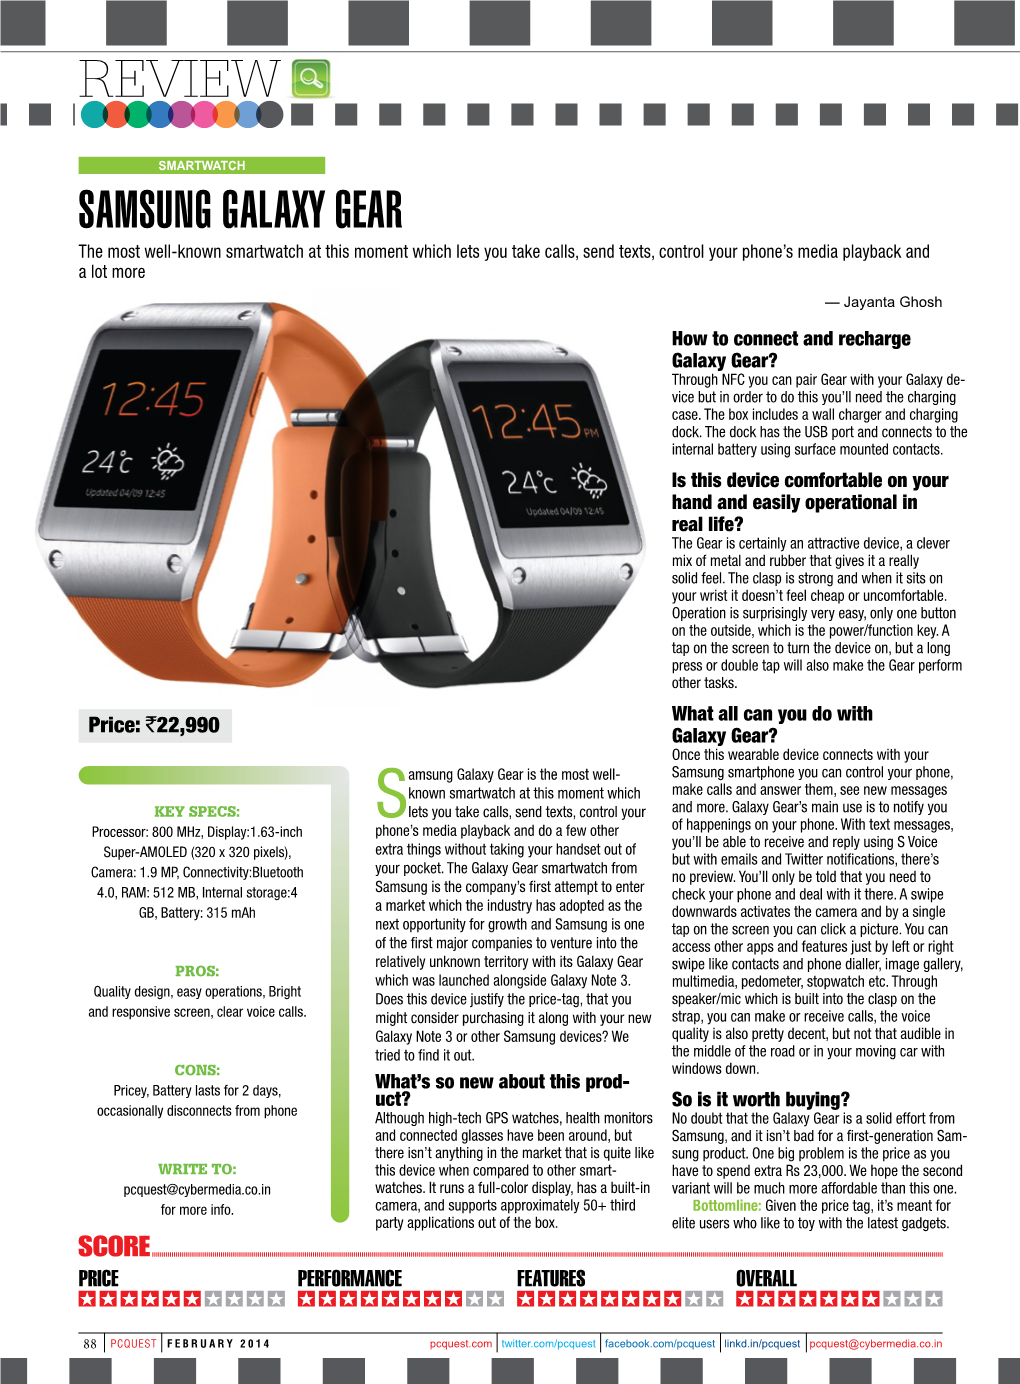 Samsung Galaxy Gear the Most Well-Known Smartwatch at This Moment Which Lets You Take Calls, Send Texts, Control Your Phone’S Media Playback and a Lot More